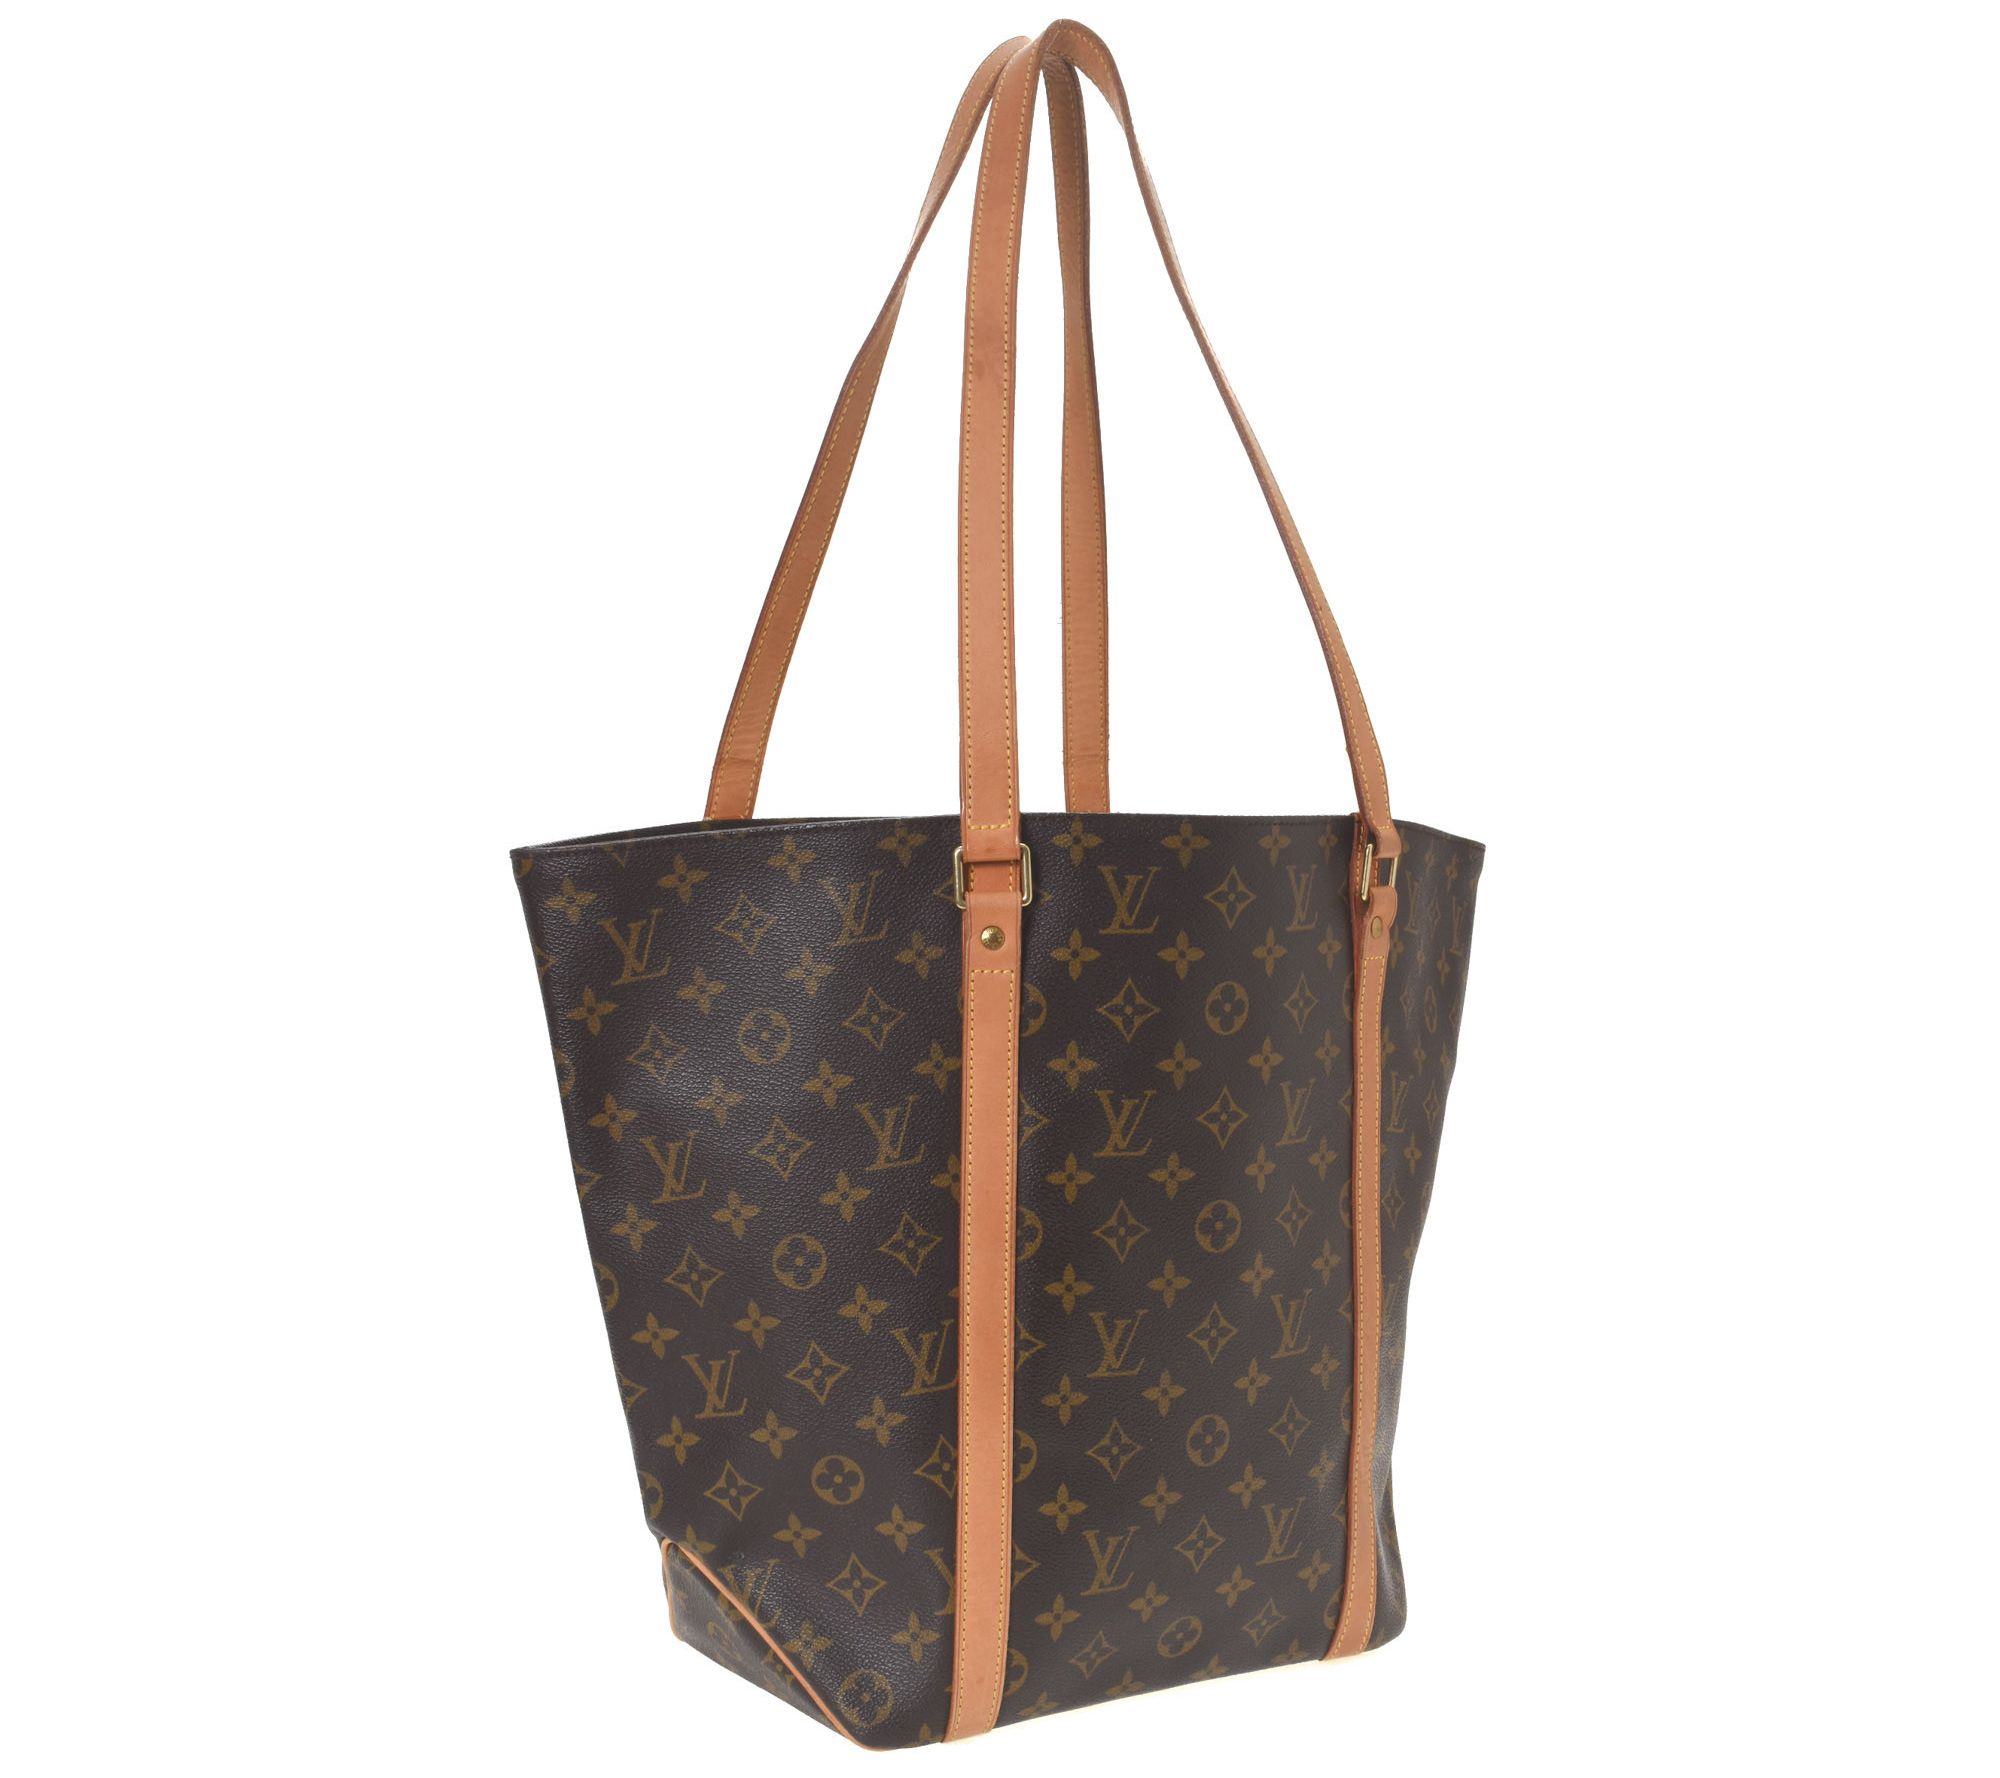 Pre-owned Louis Vuitton Monogram Leather Very One Handle Bag